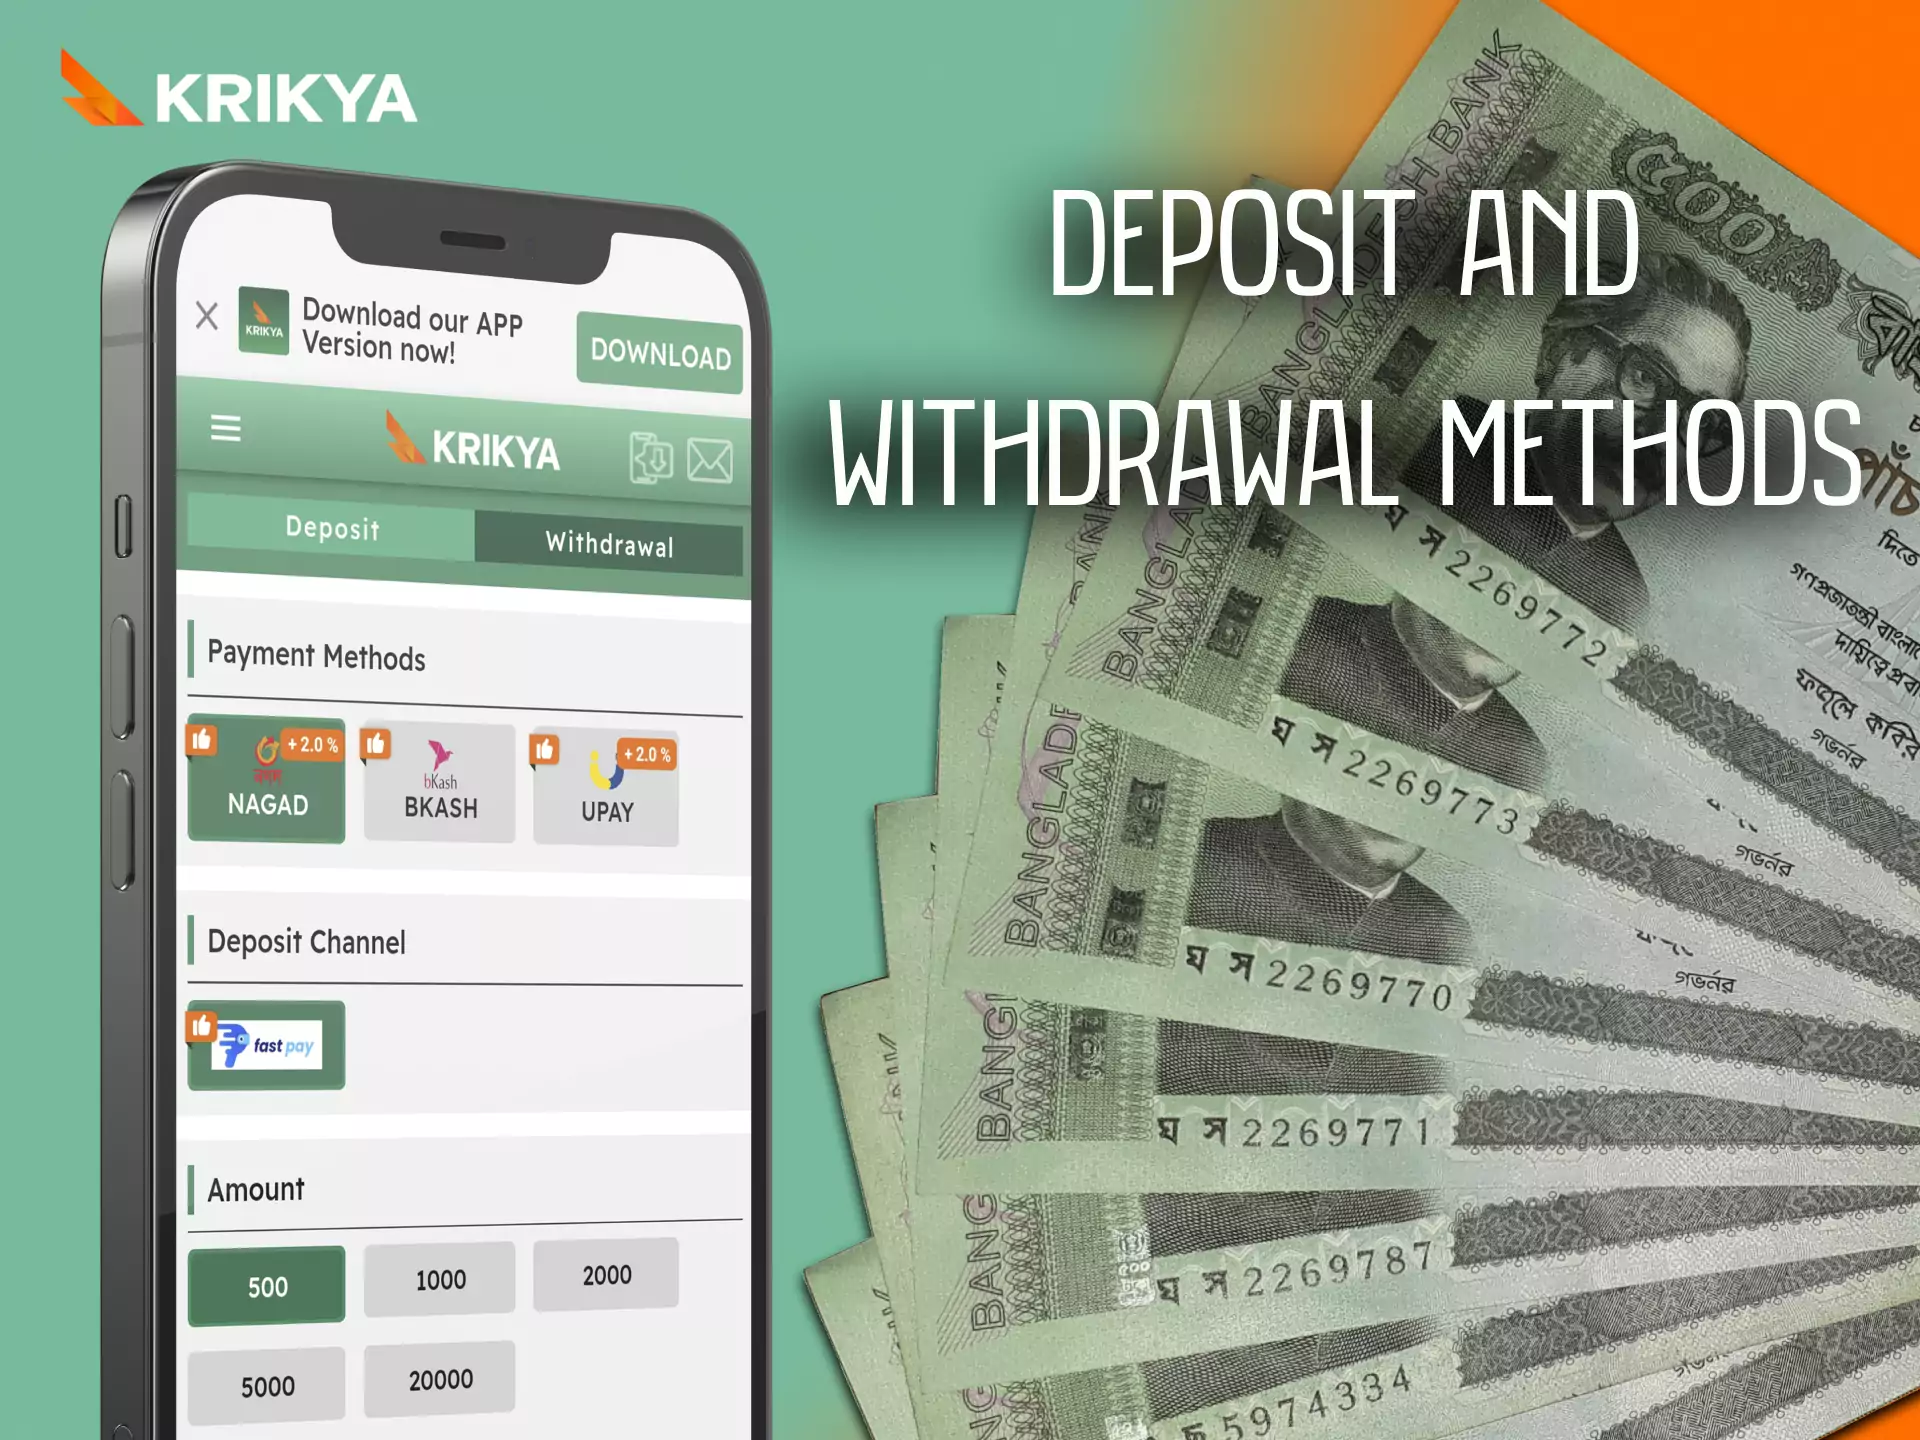 Krikya provides various ways to deposit and withdraw money.